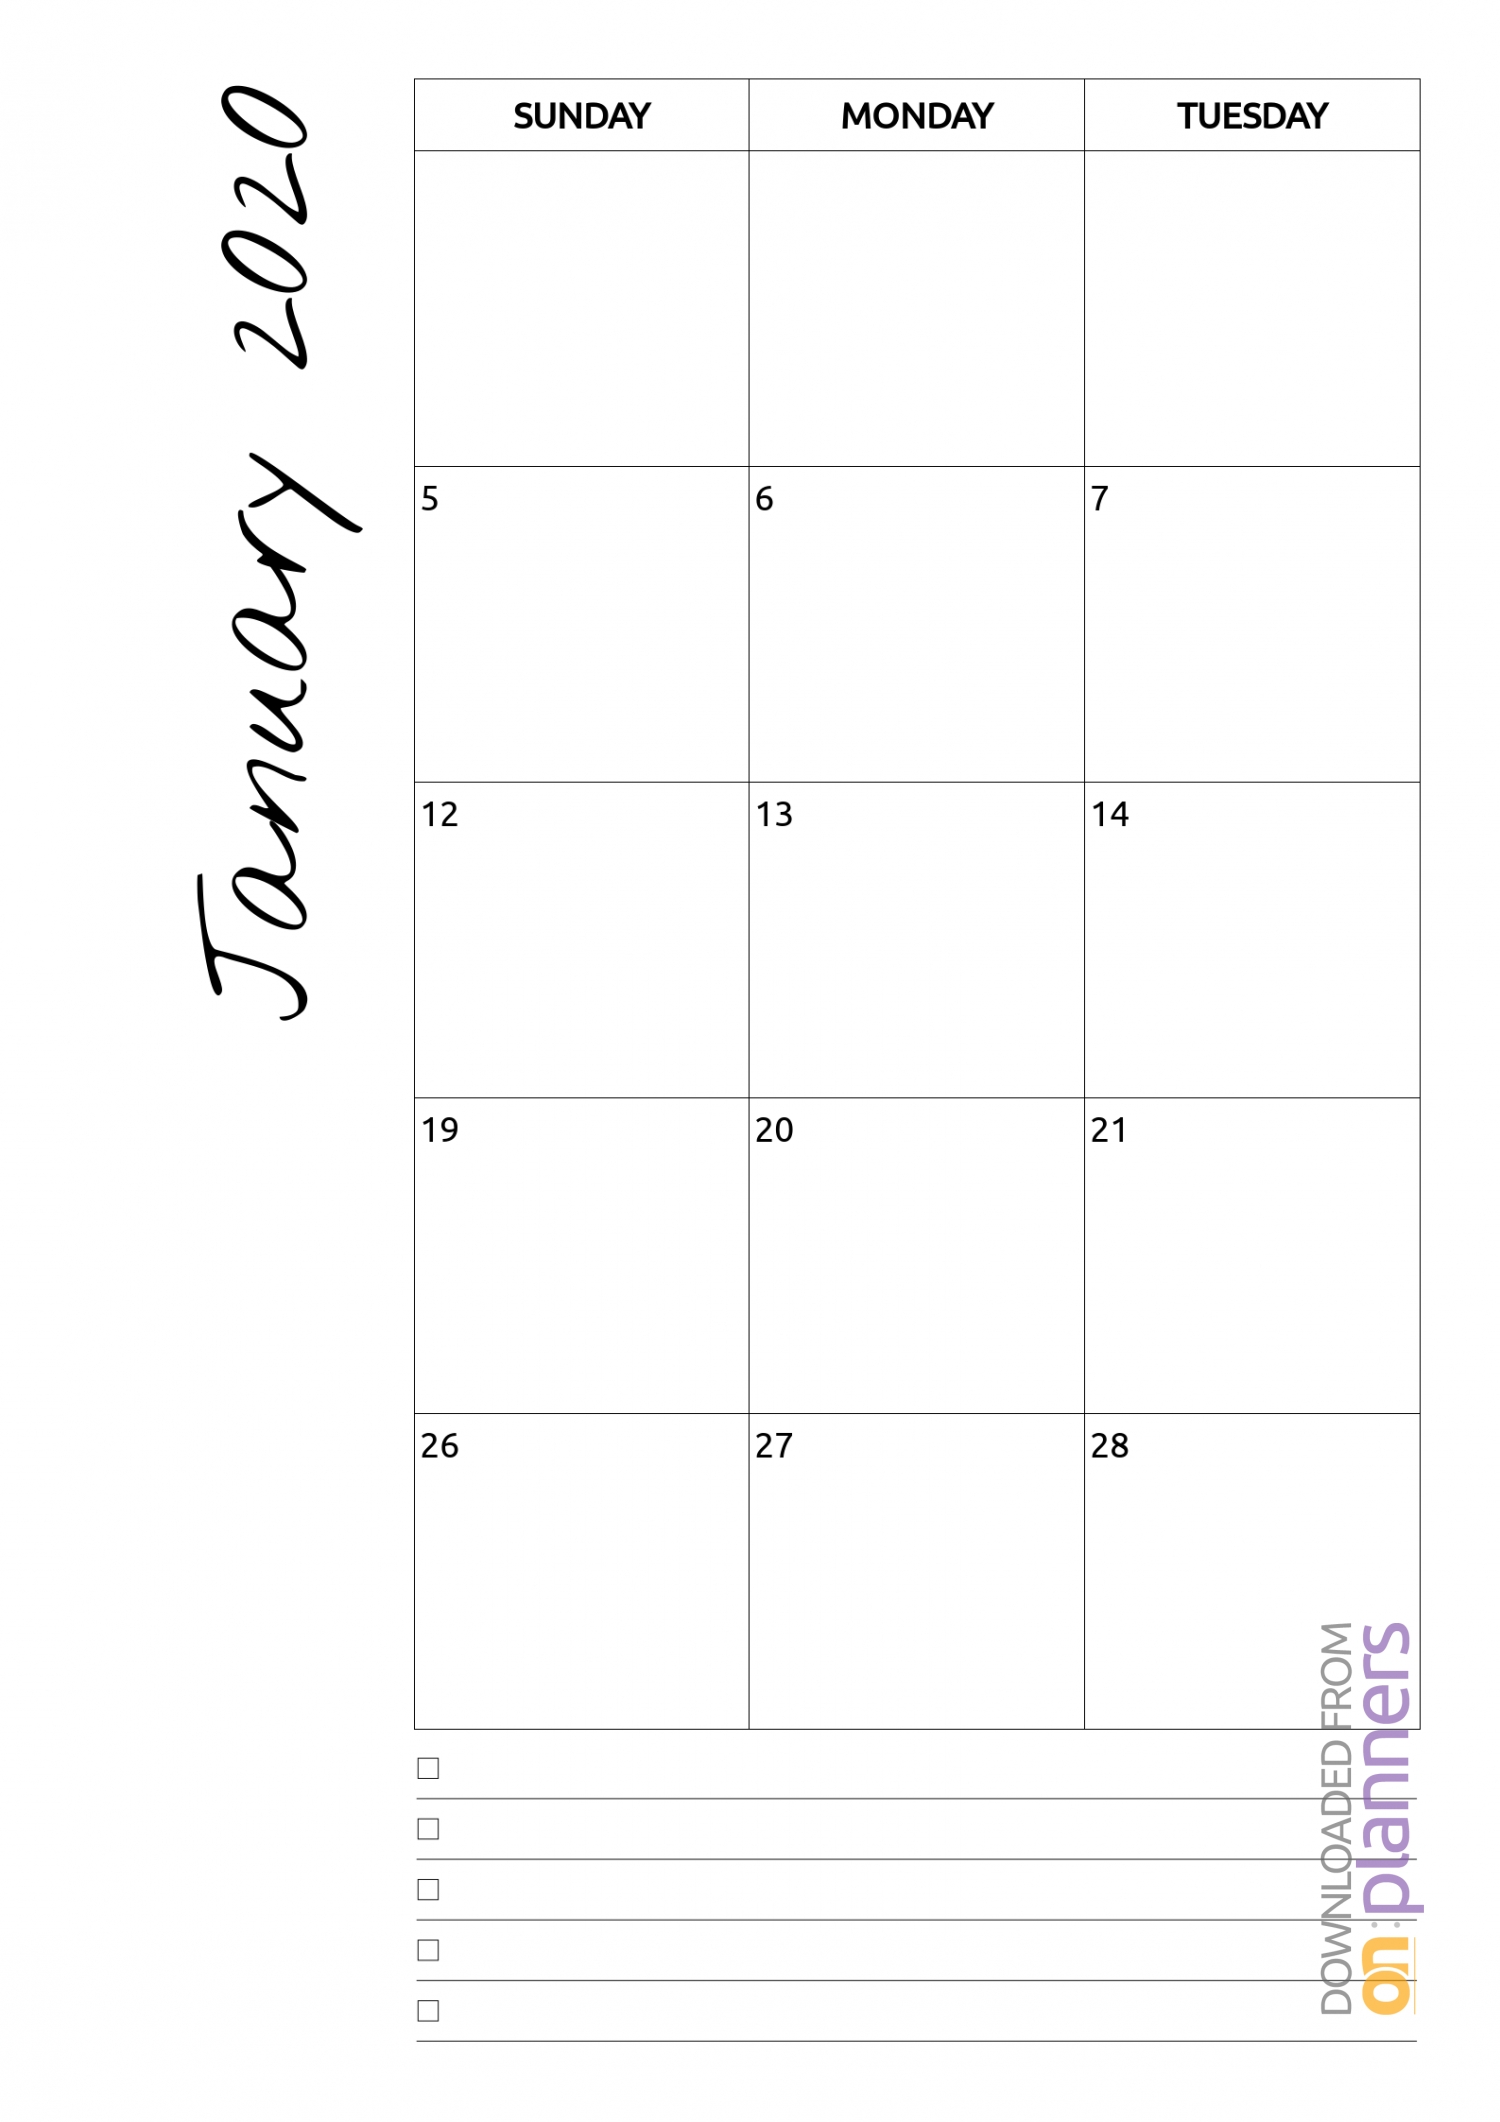 Download Printable Monthly Calendar With Notes Pdf intended for Free Printable Undated Monthly Calendar